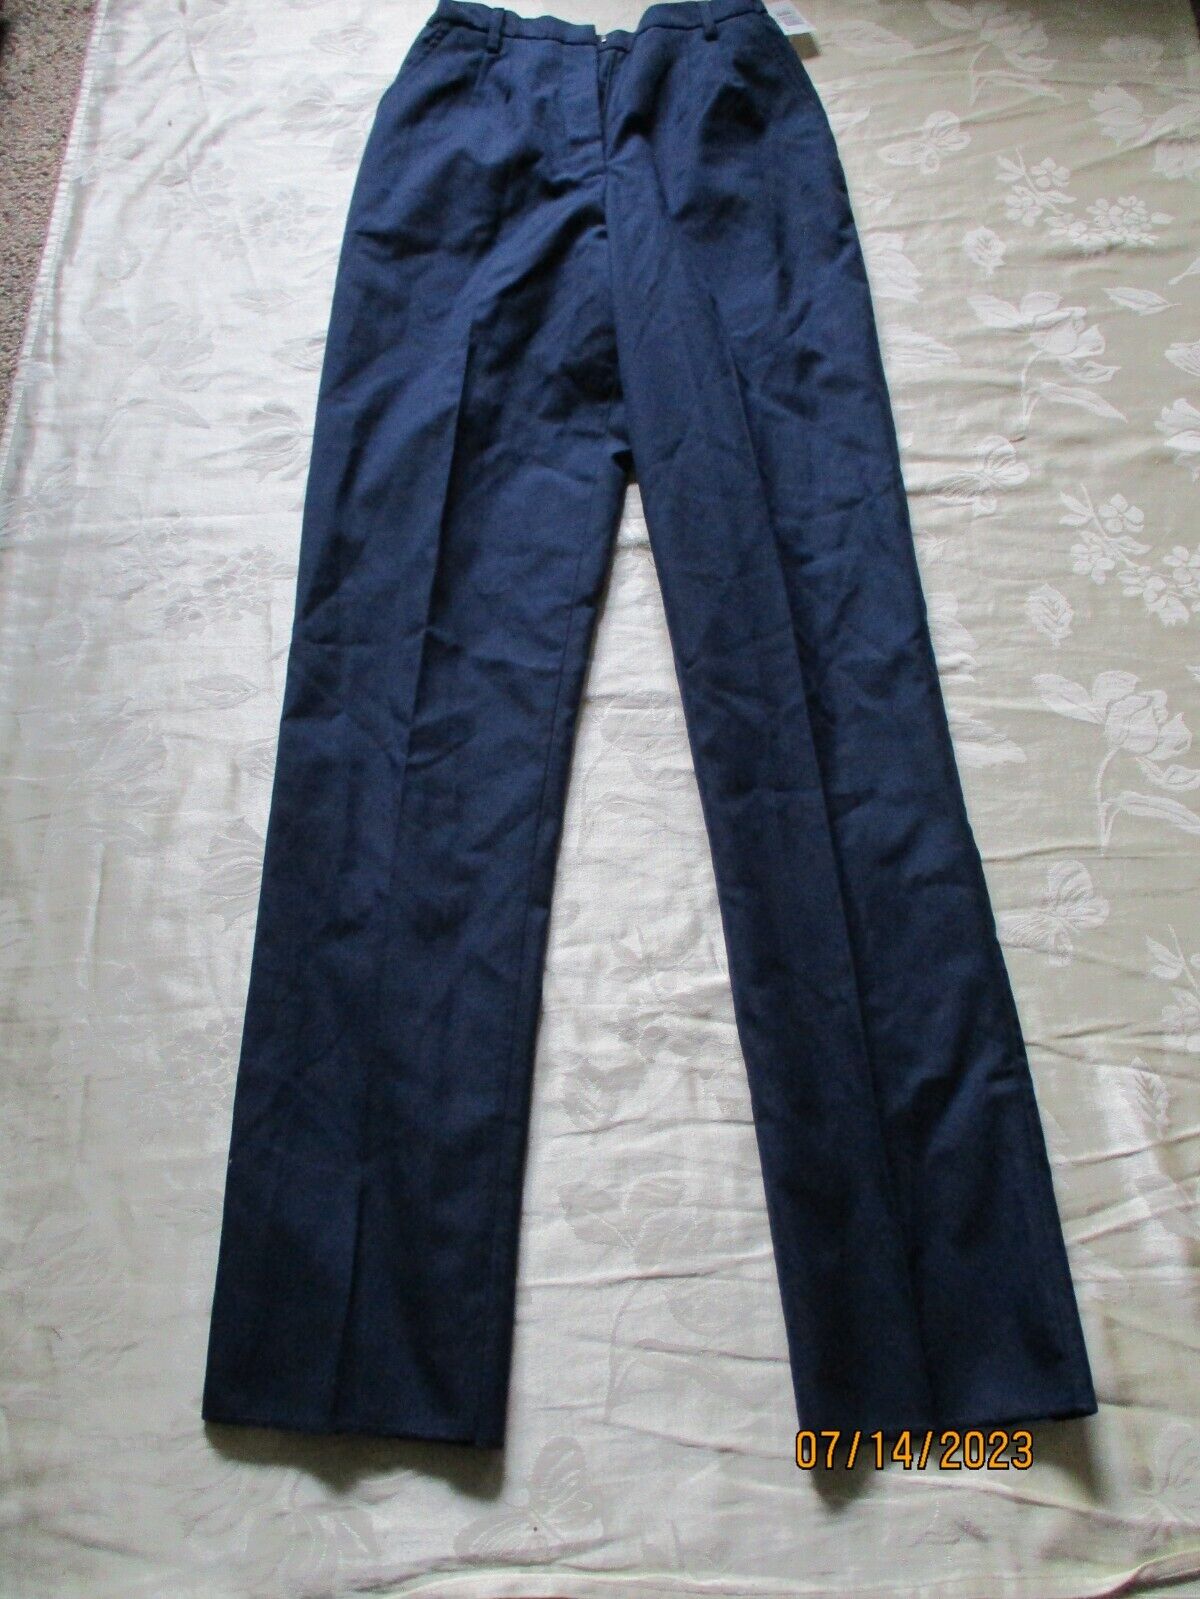 NEW/NOS DSCP Women\'s AF Military Slacks - SEE PICTS IN LISTING FOR SIZE